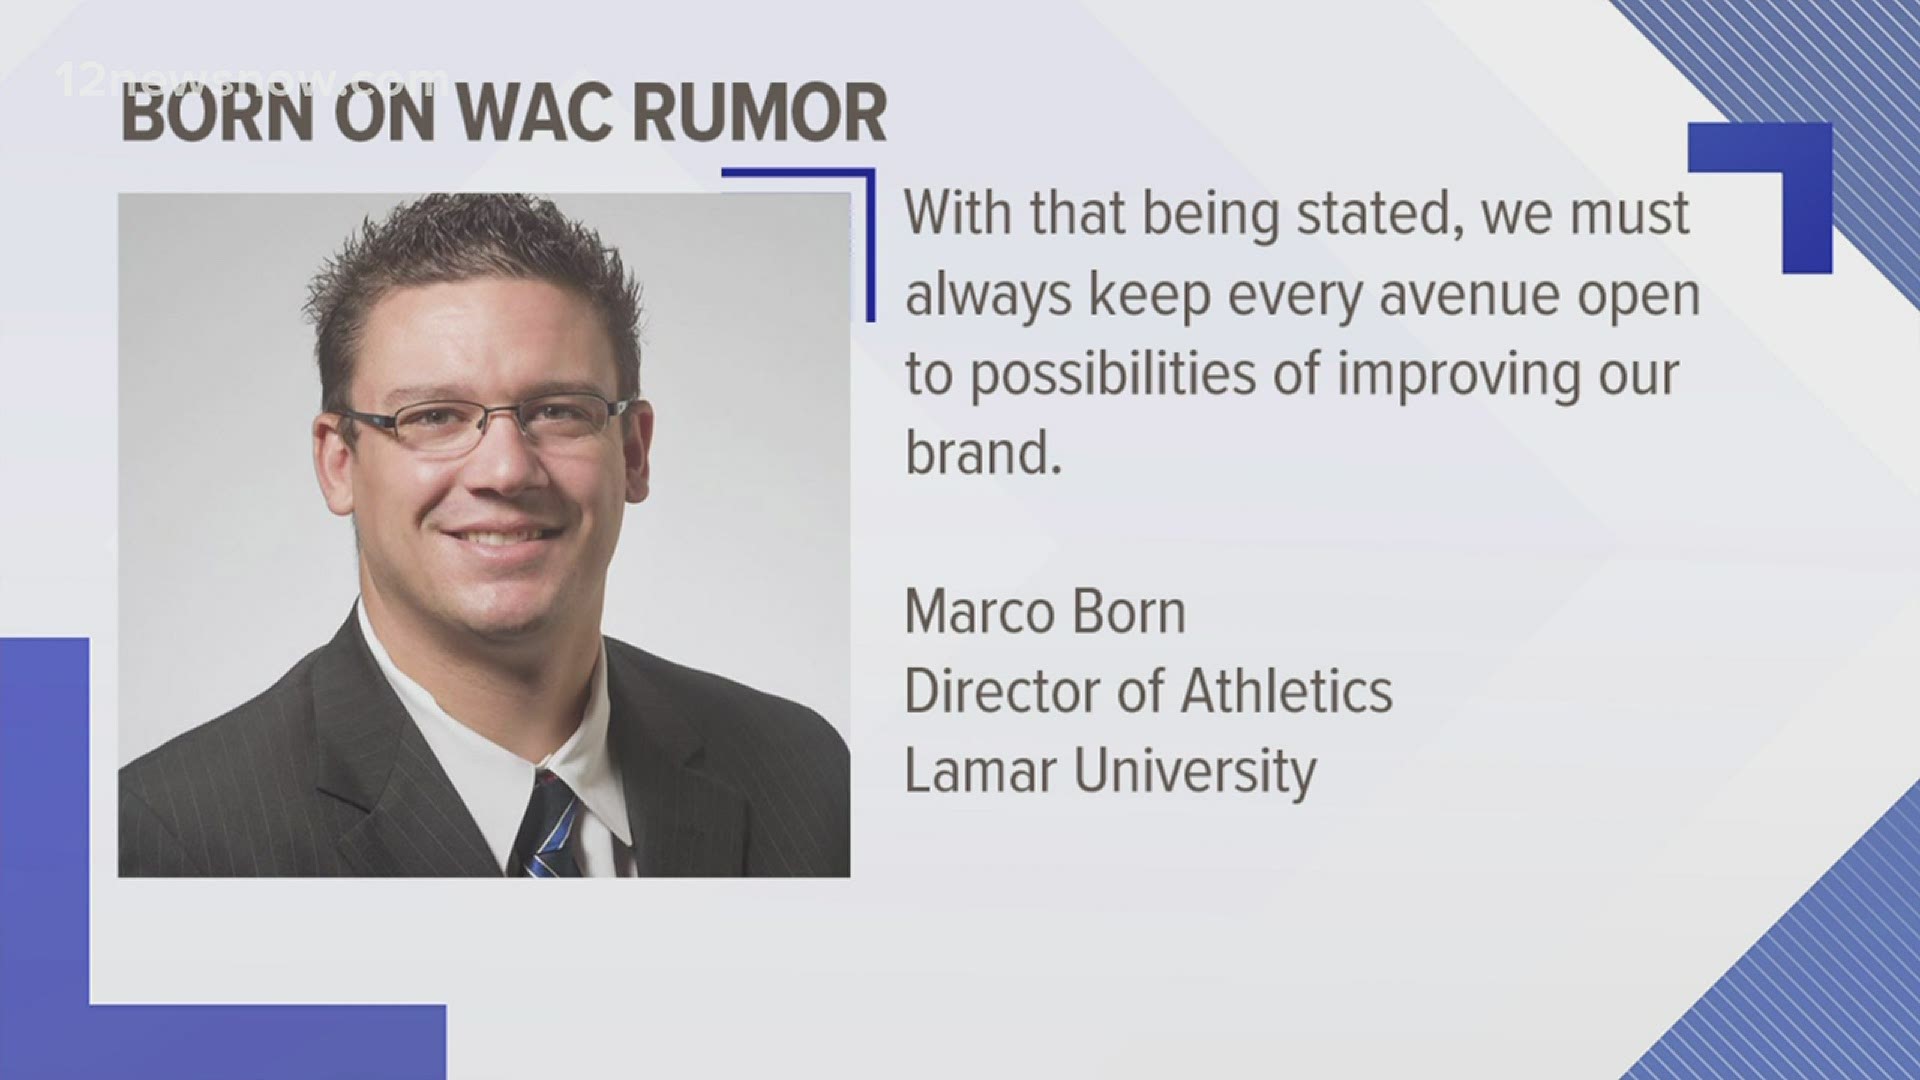 Rumors continue to mention Lamar making a move to WAC